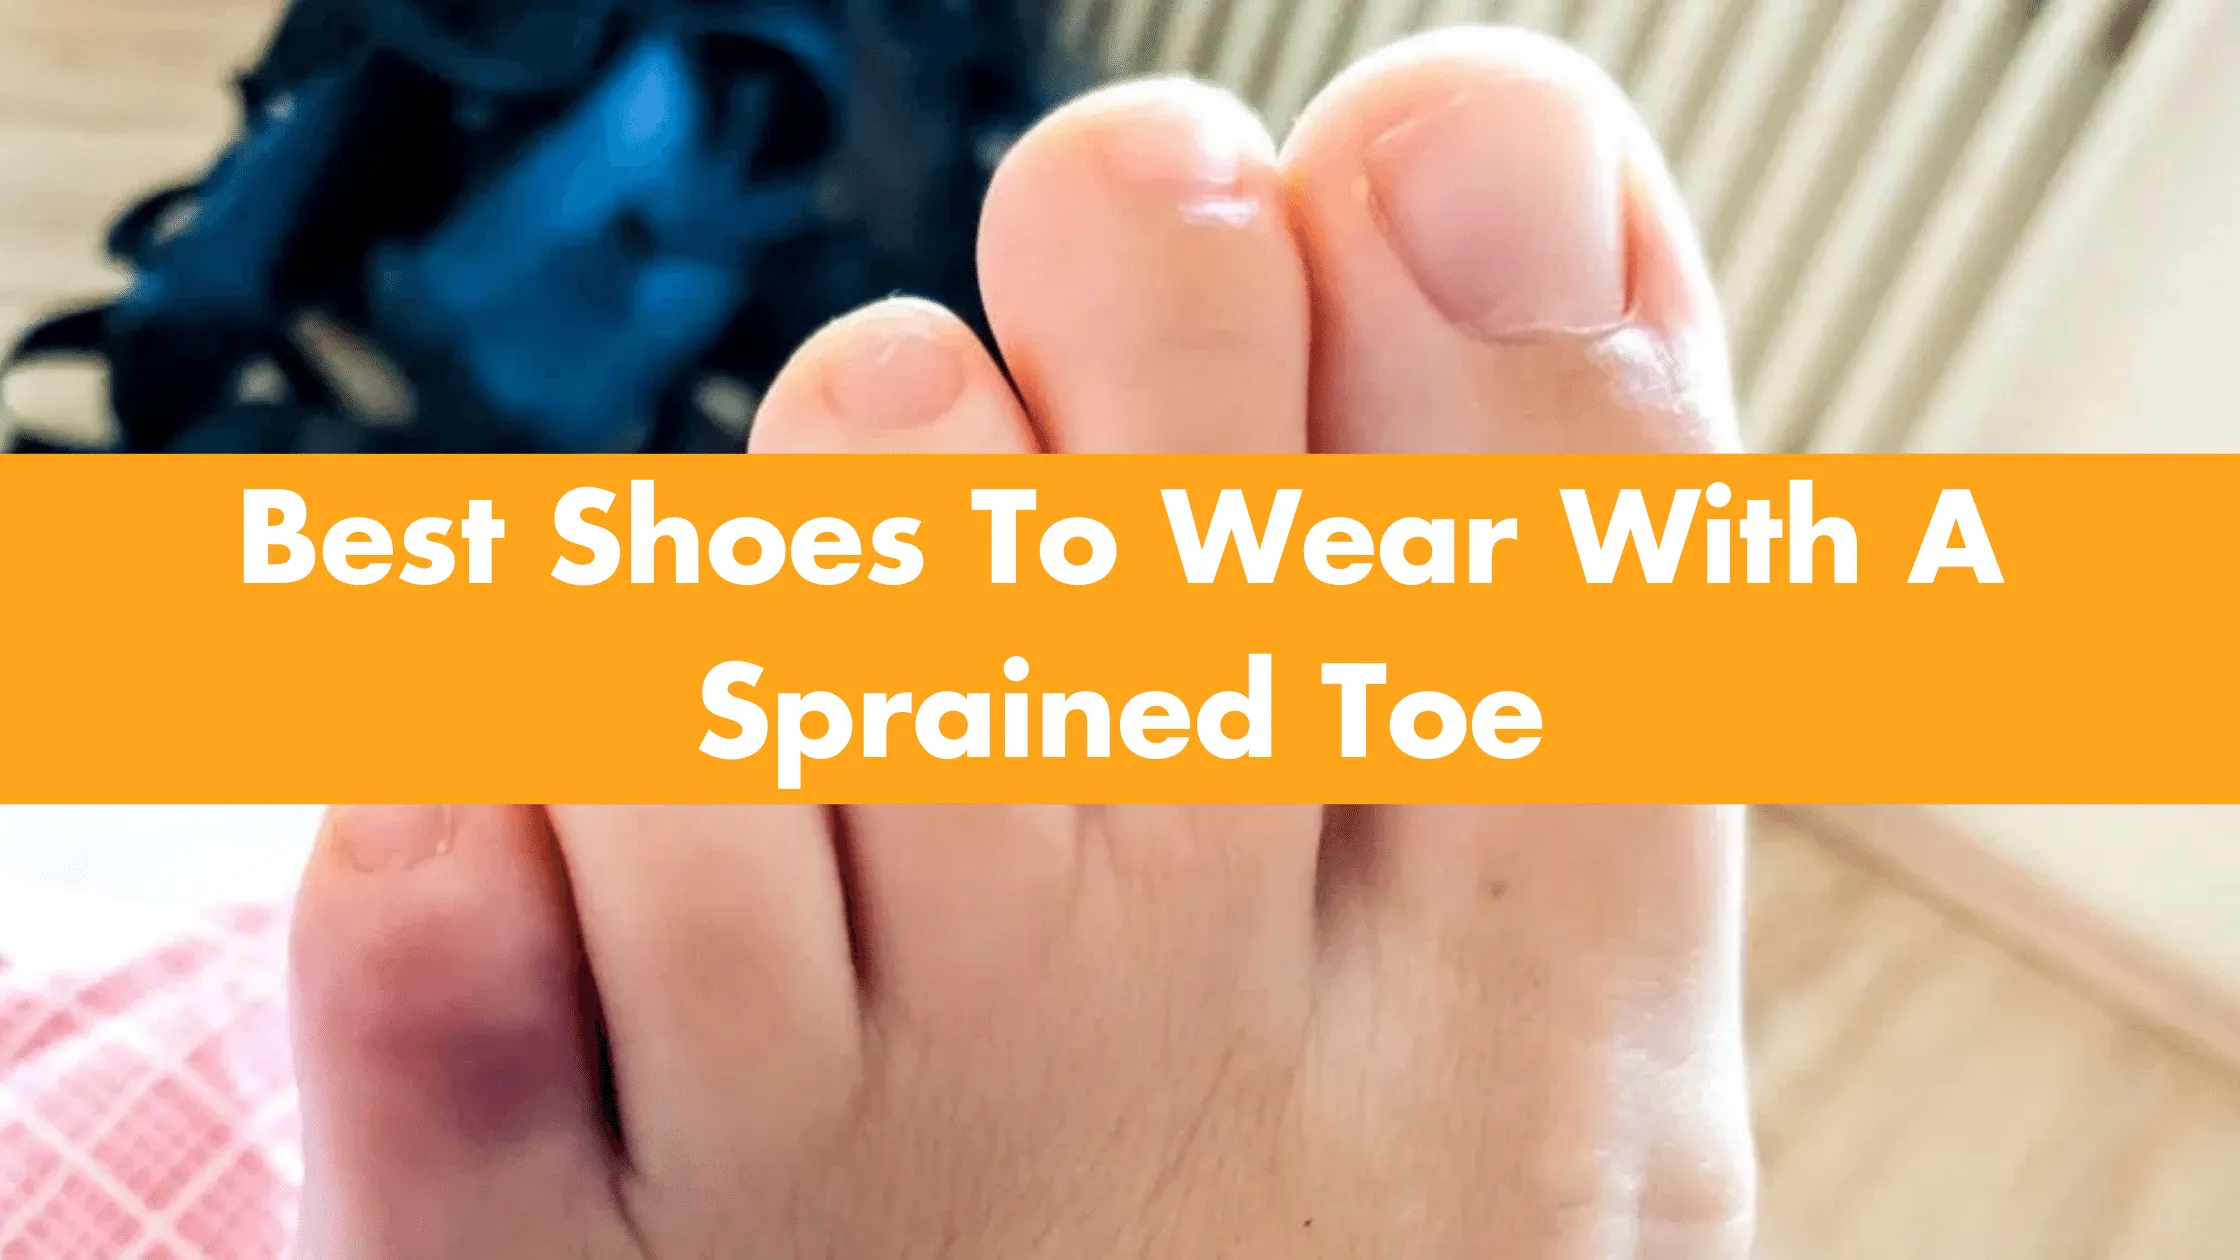 Best Shoes To Wear With A Sprained Toe